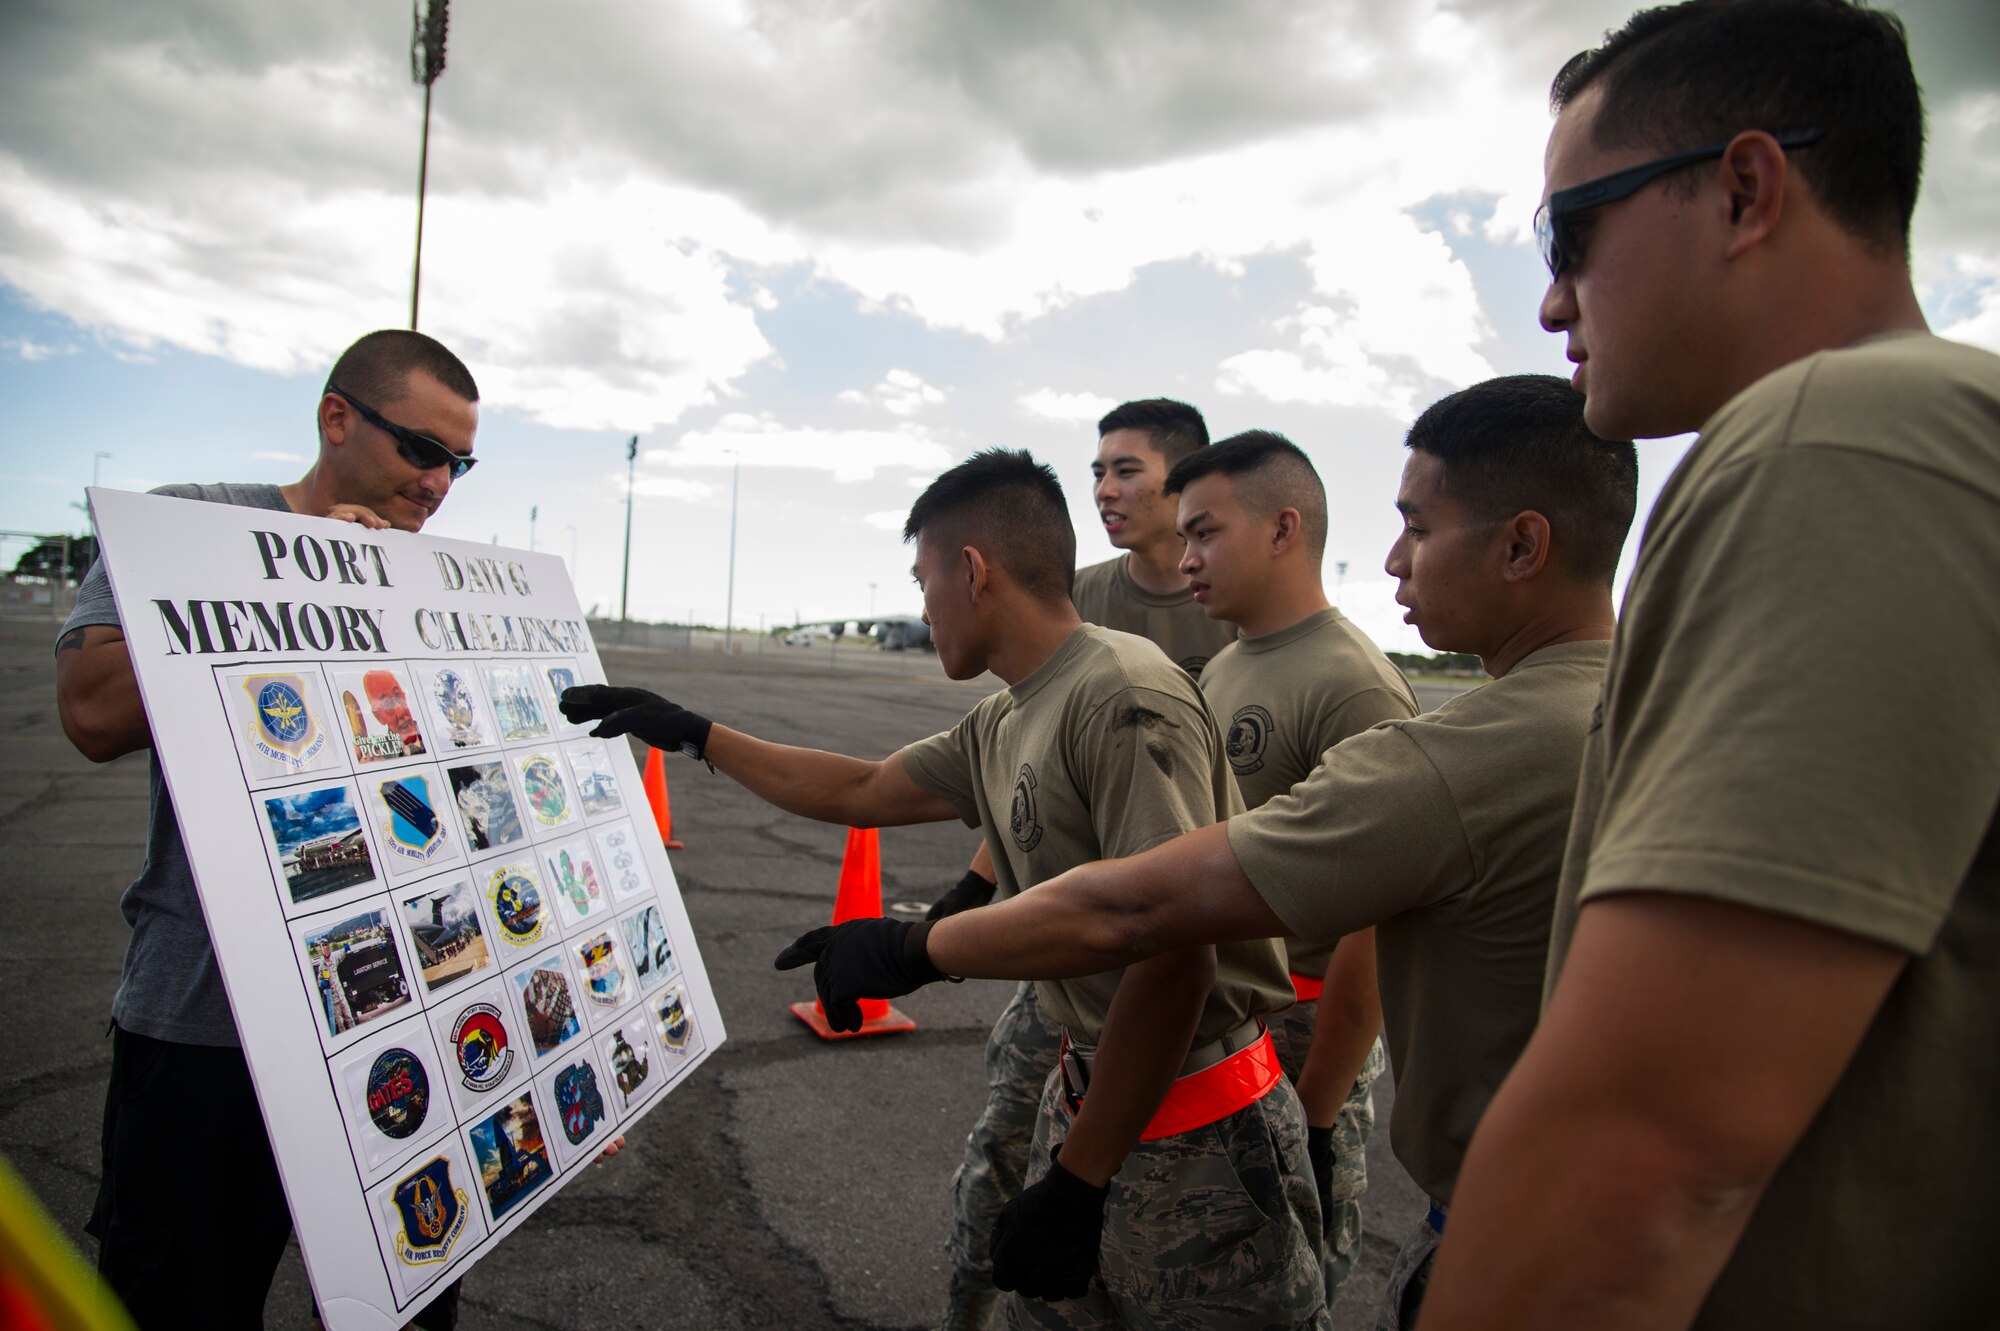 Members of the 48th Aerial Port Squadron review a memory board during the combat fitness challenge portion of the Hickam Port Dawg Challenge, at Joint Base Pearl Harbor-Hickam, Hawaii, Nov. 17, 2017. The aerial port community hosts a Port Dawg Challenge every year to promote professionalism, and demonstrate air and space expeditionary force capabilities. (U.S. Air Force photo by Tech. Sgt. Heather Redman)